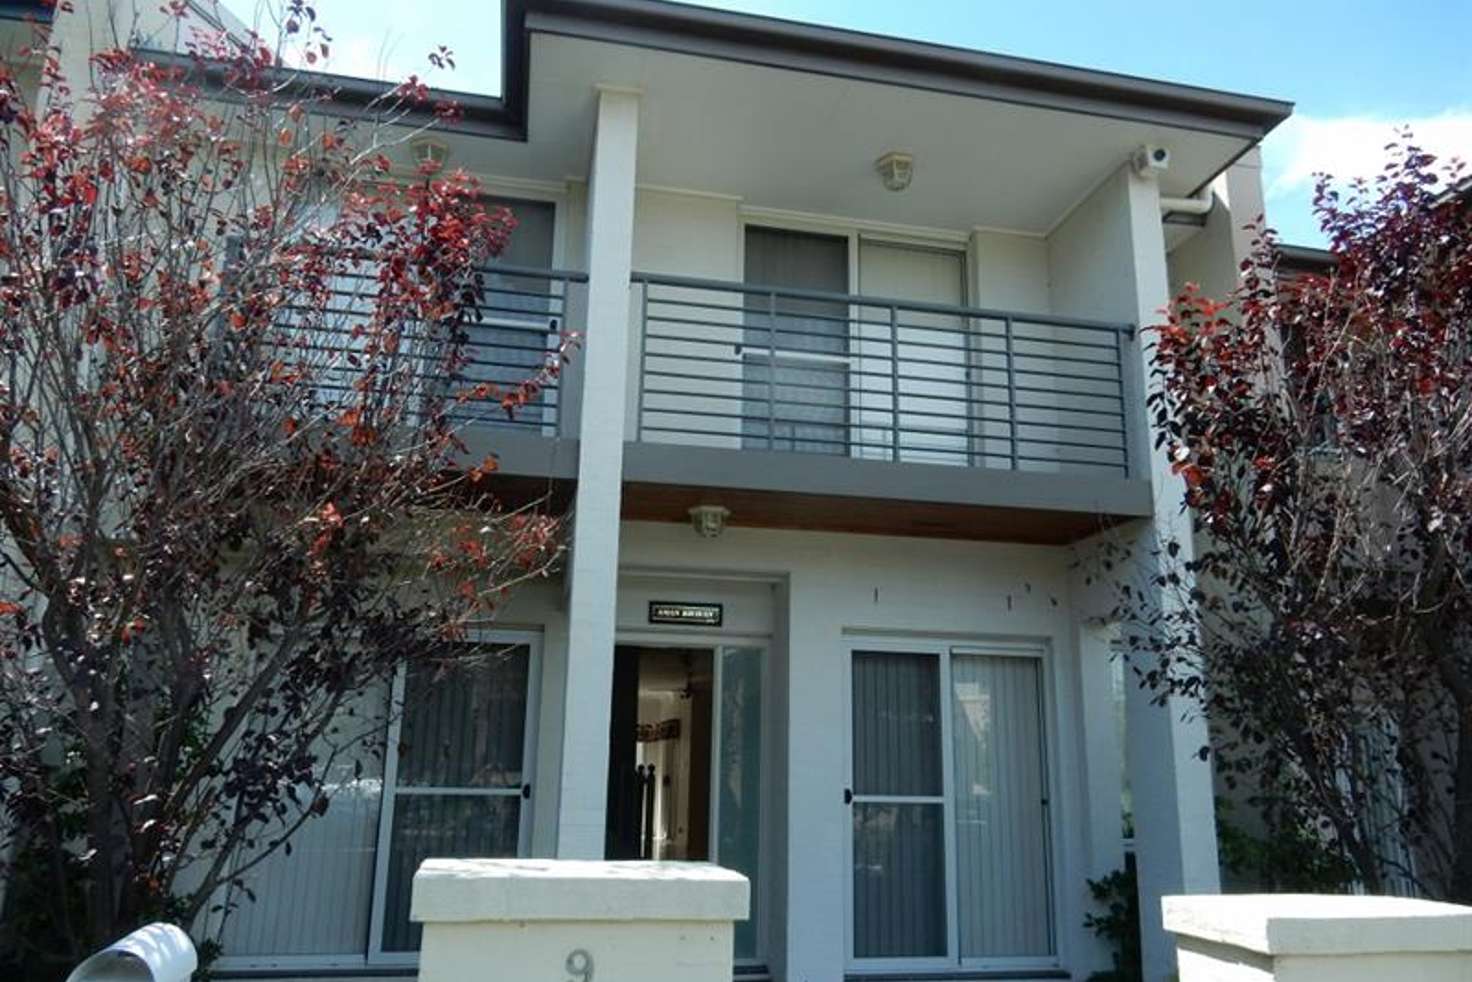 Main view of Homely house listing, 9 Stowe Avenue, Campbelltown NSW 2560